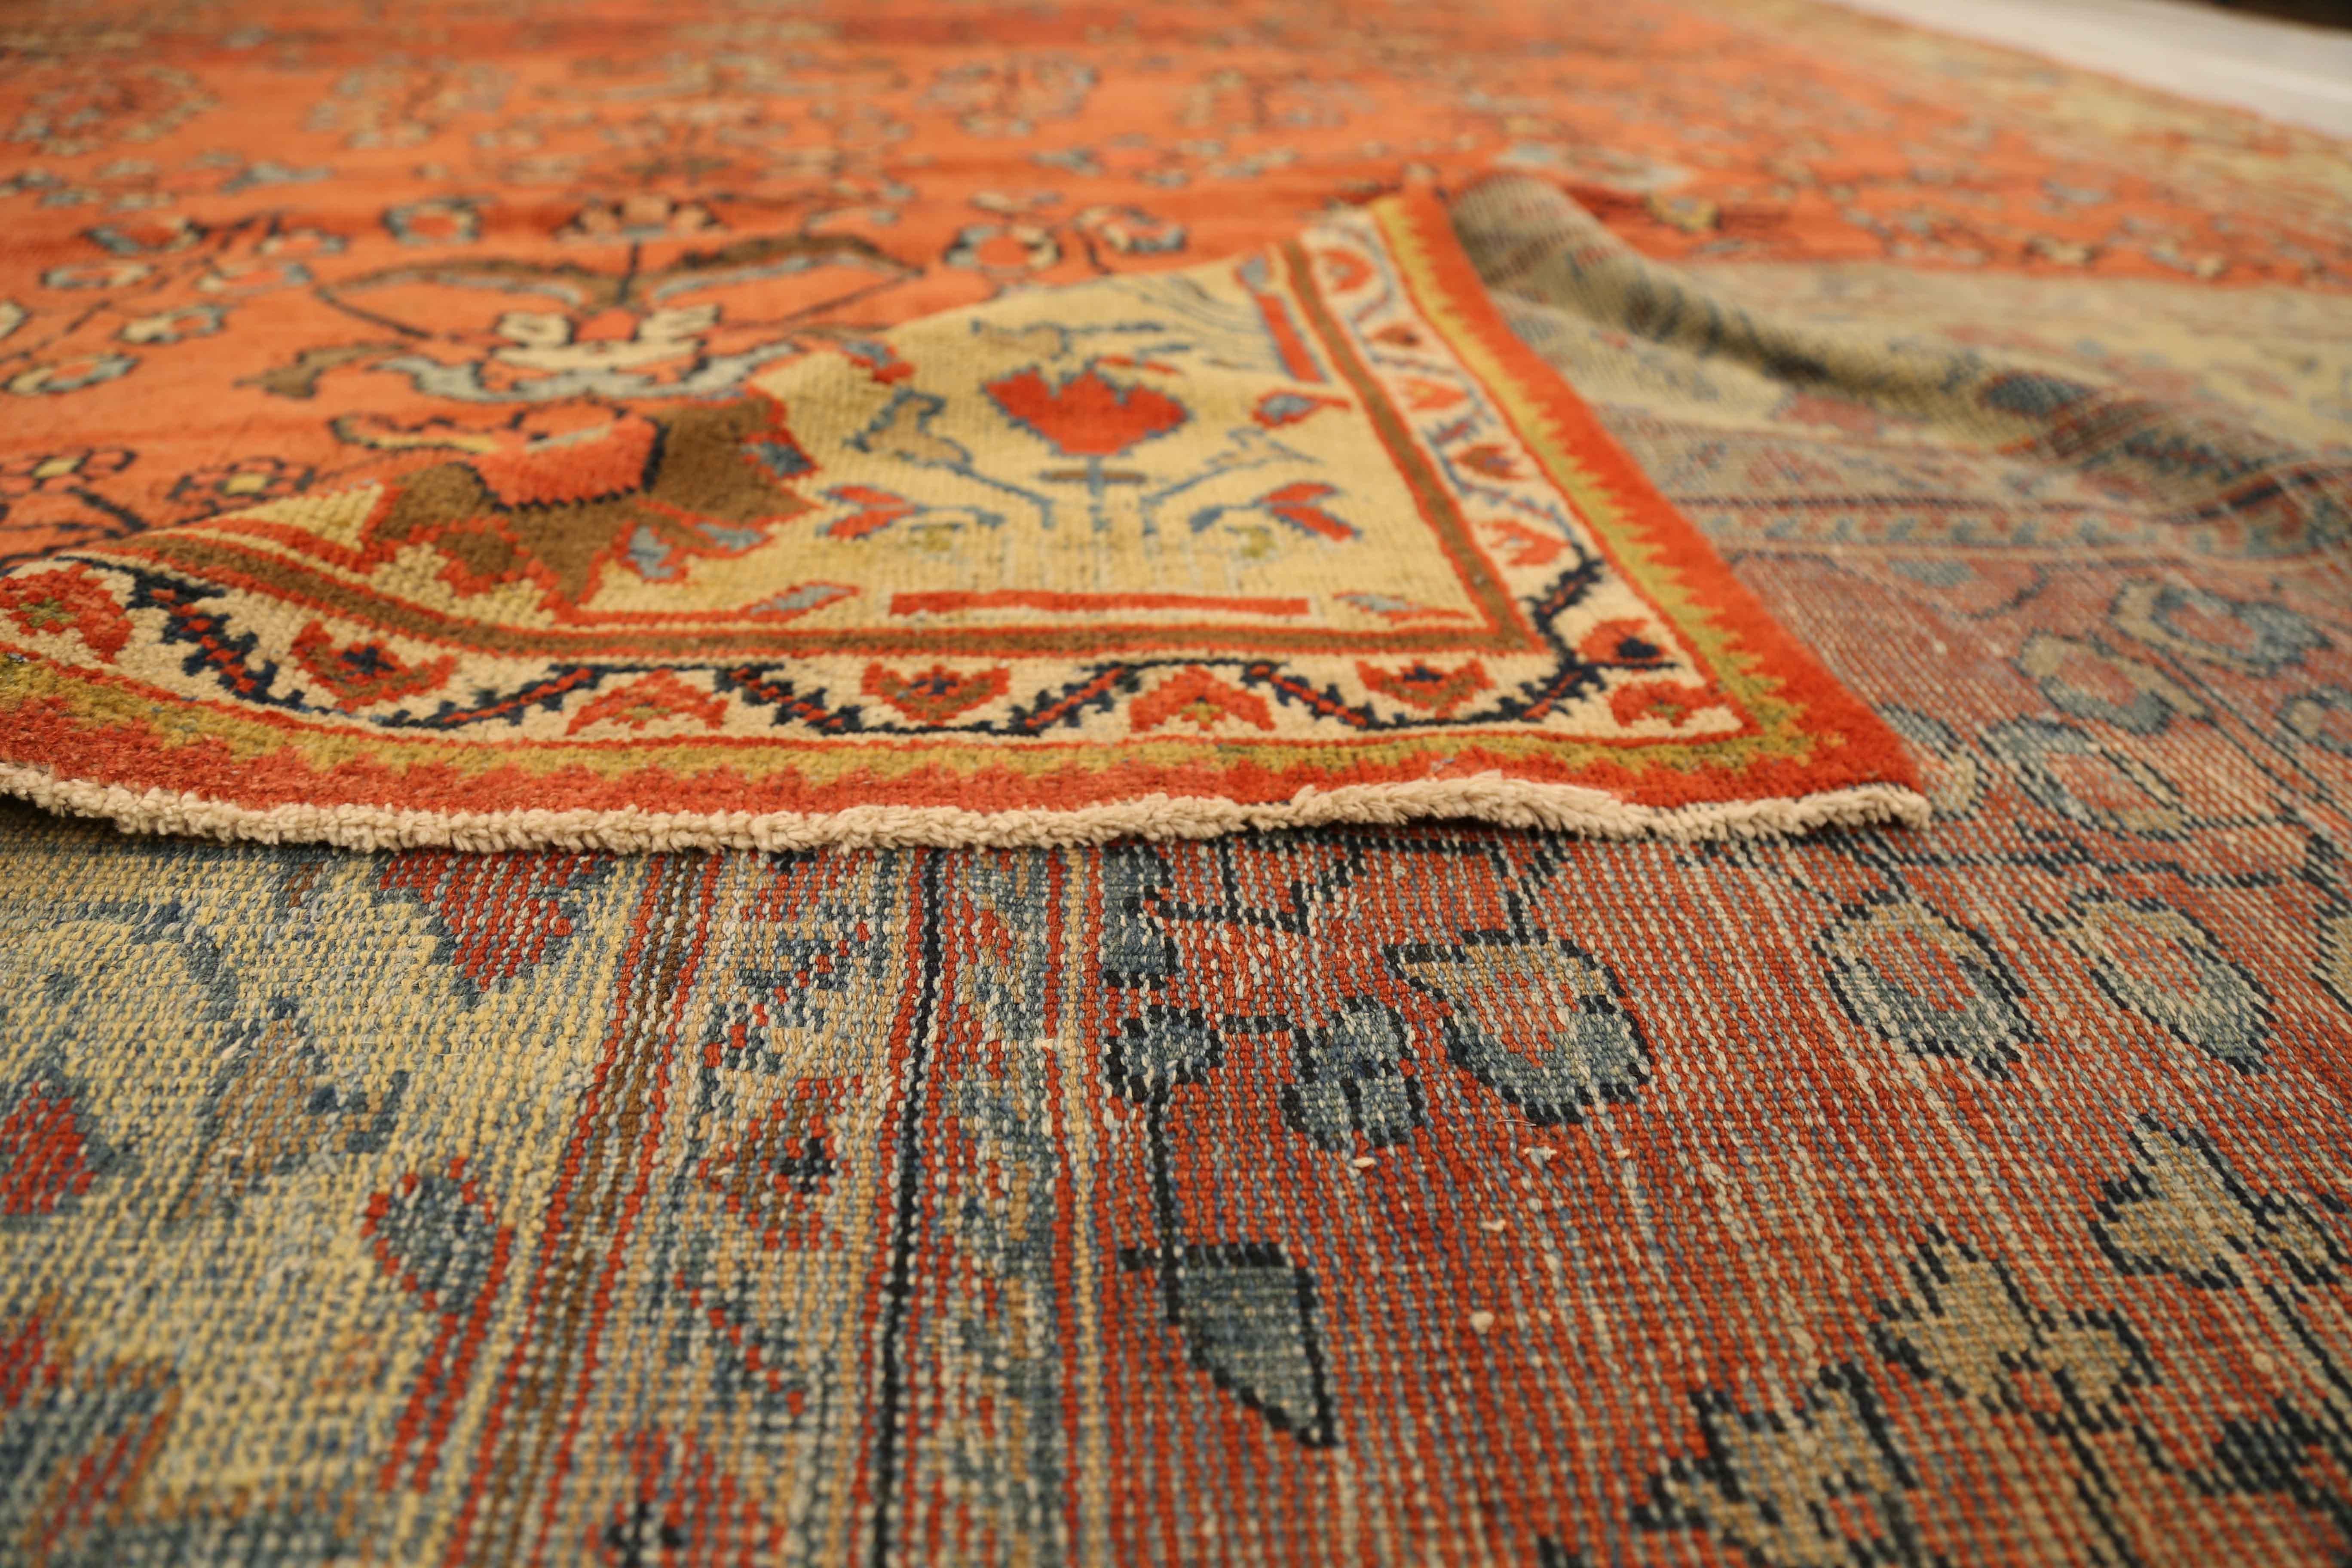 It was made in the 1940s using fine wool and all-natural dyes. It’s an antique Persian rug hand knotted using floral design patterns, a specialty of master weavers in the ancient village of Mahal, Persia. It has a vibrant color palette of red,